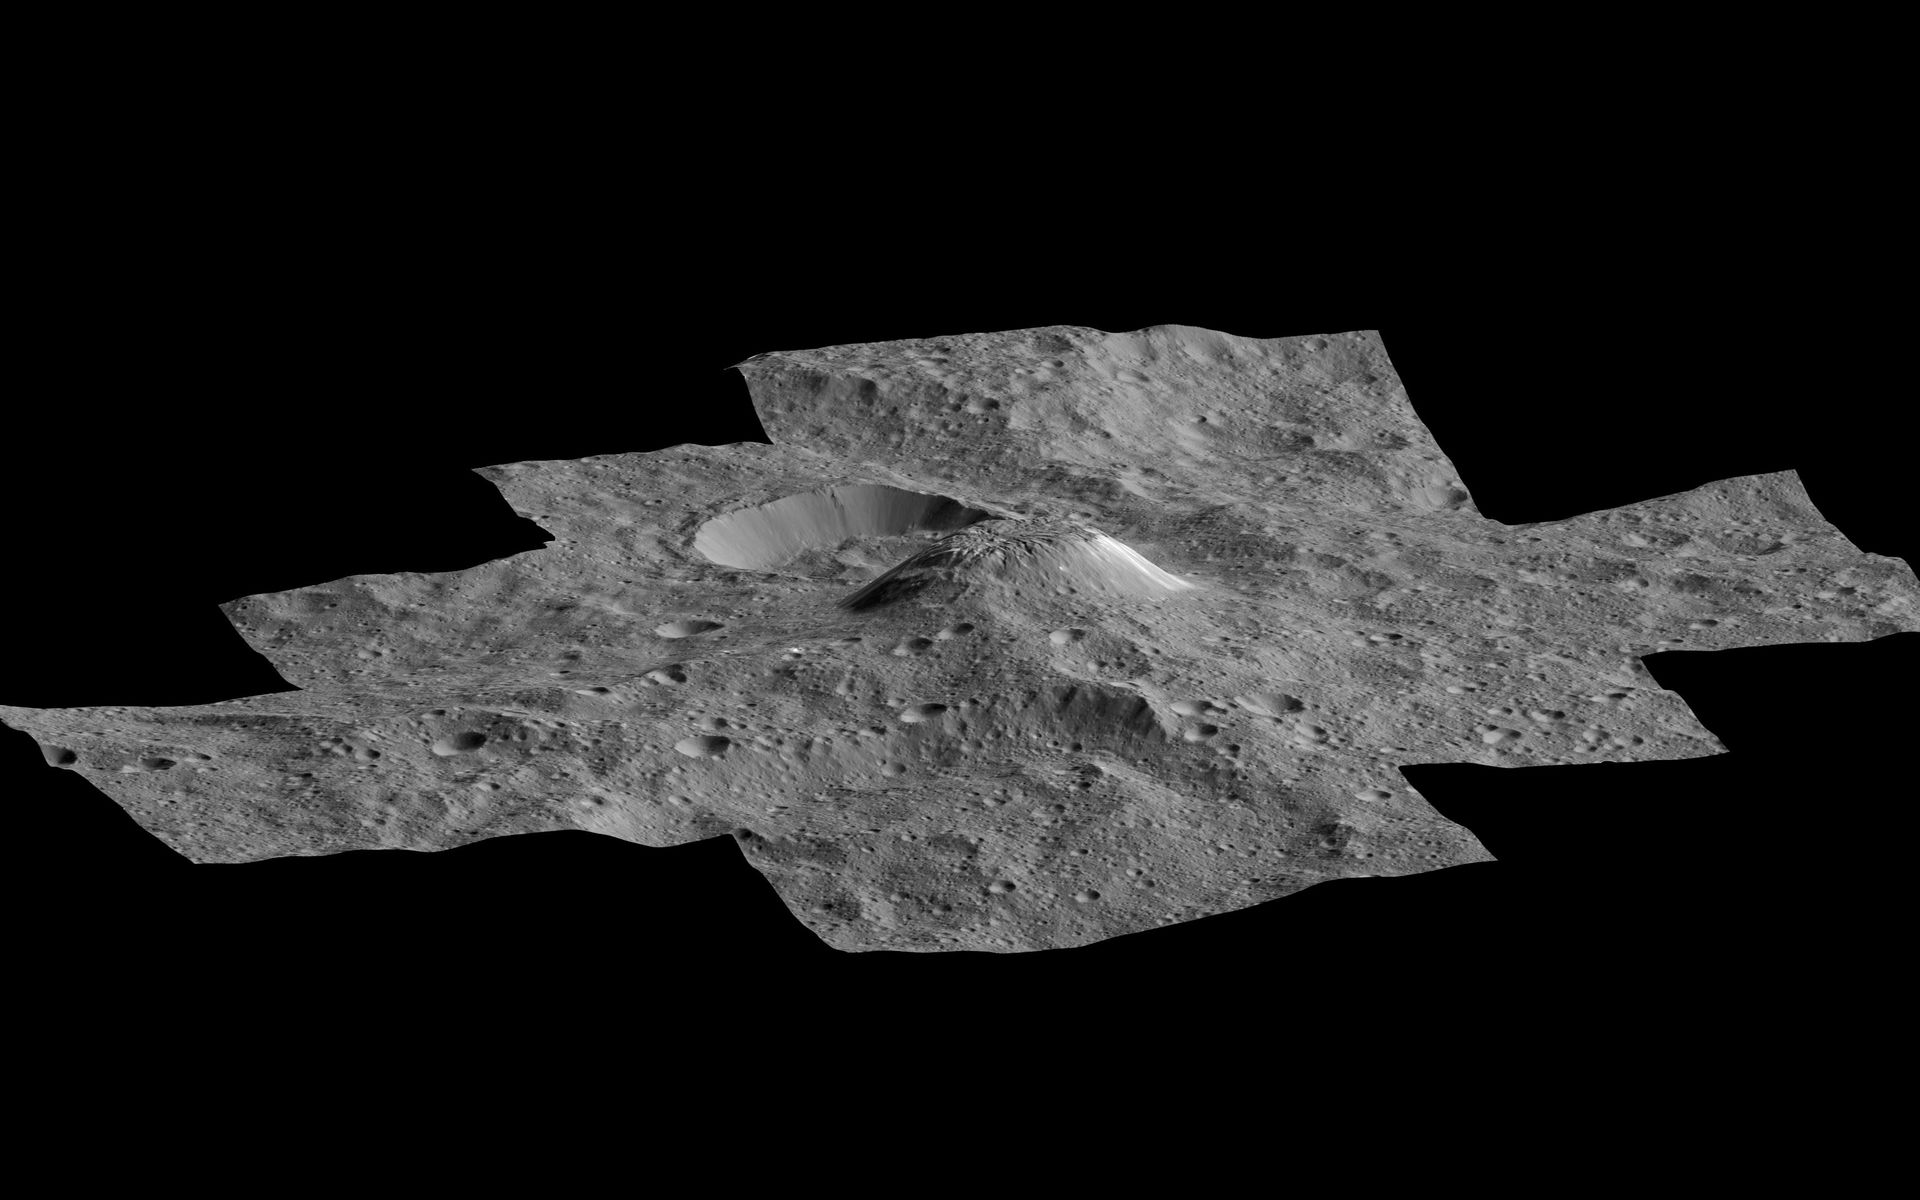 Perspective view of Ahuna Mons on Ceres